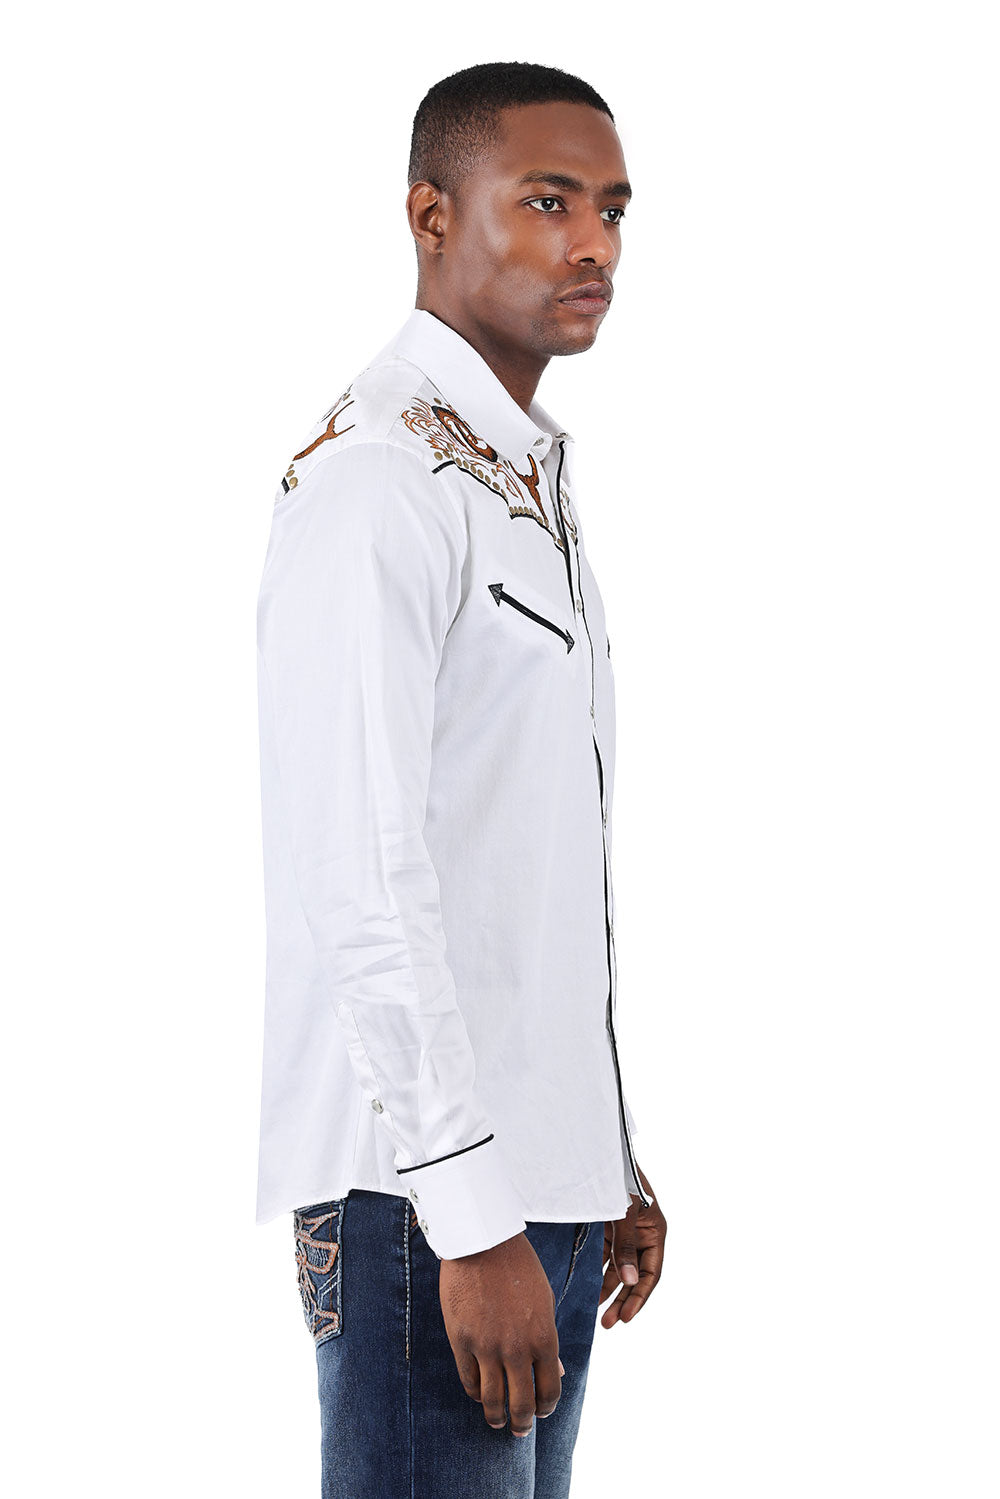 BARABAS Men's Bulls Embroidered Long Sleeve Western Shirts 3WS4 White